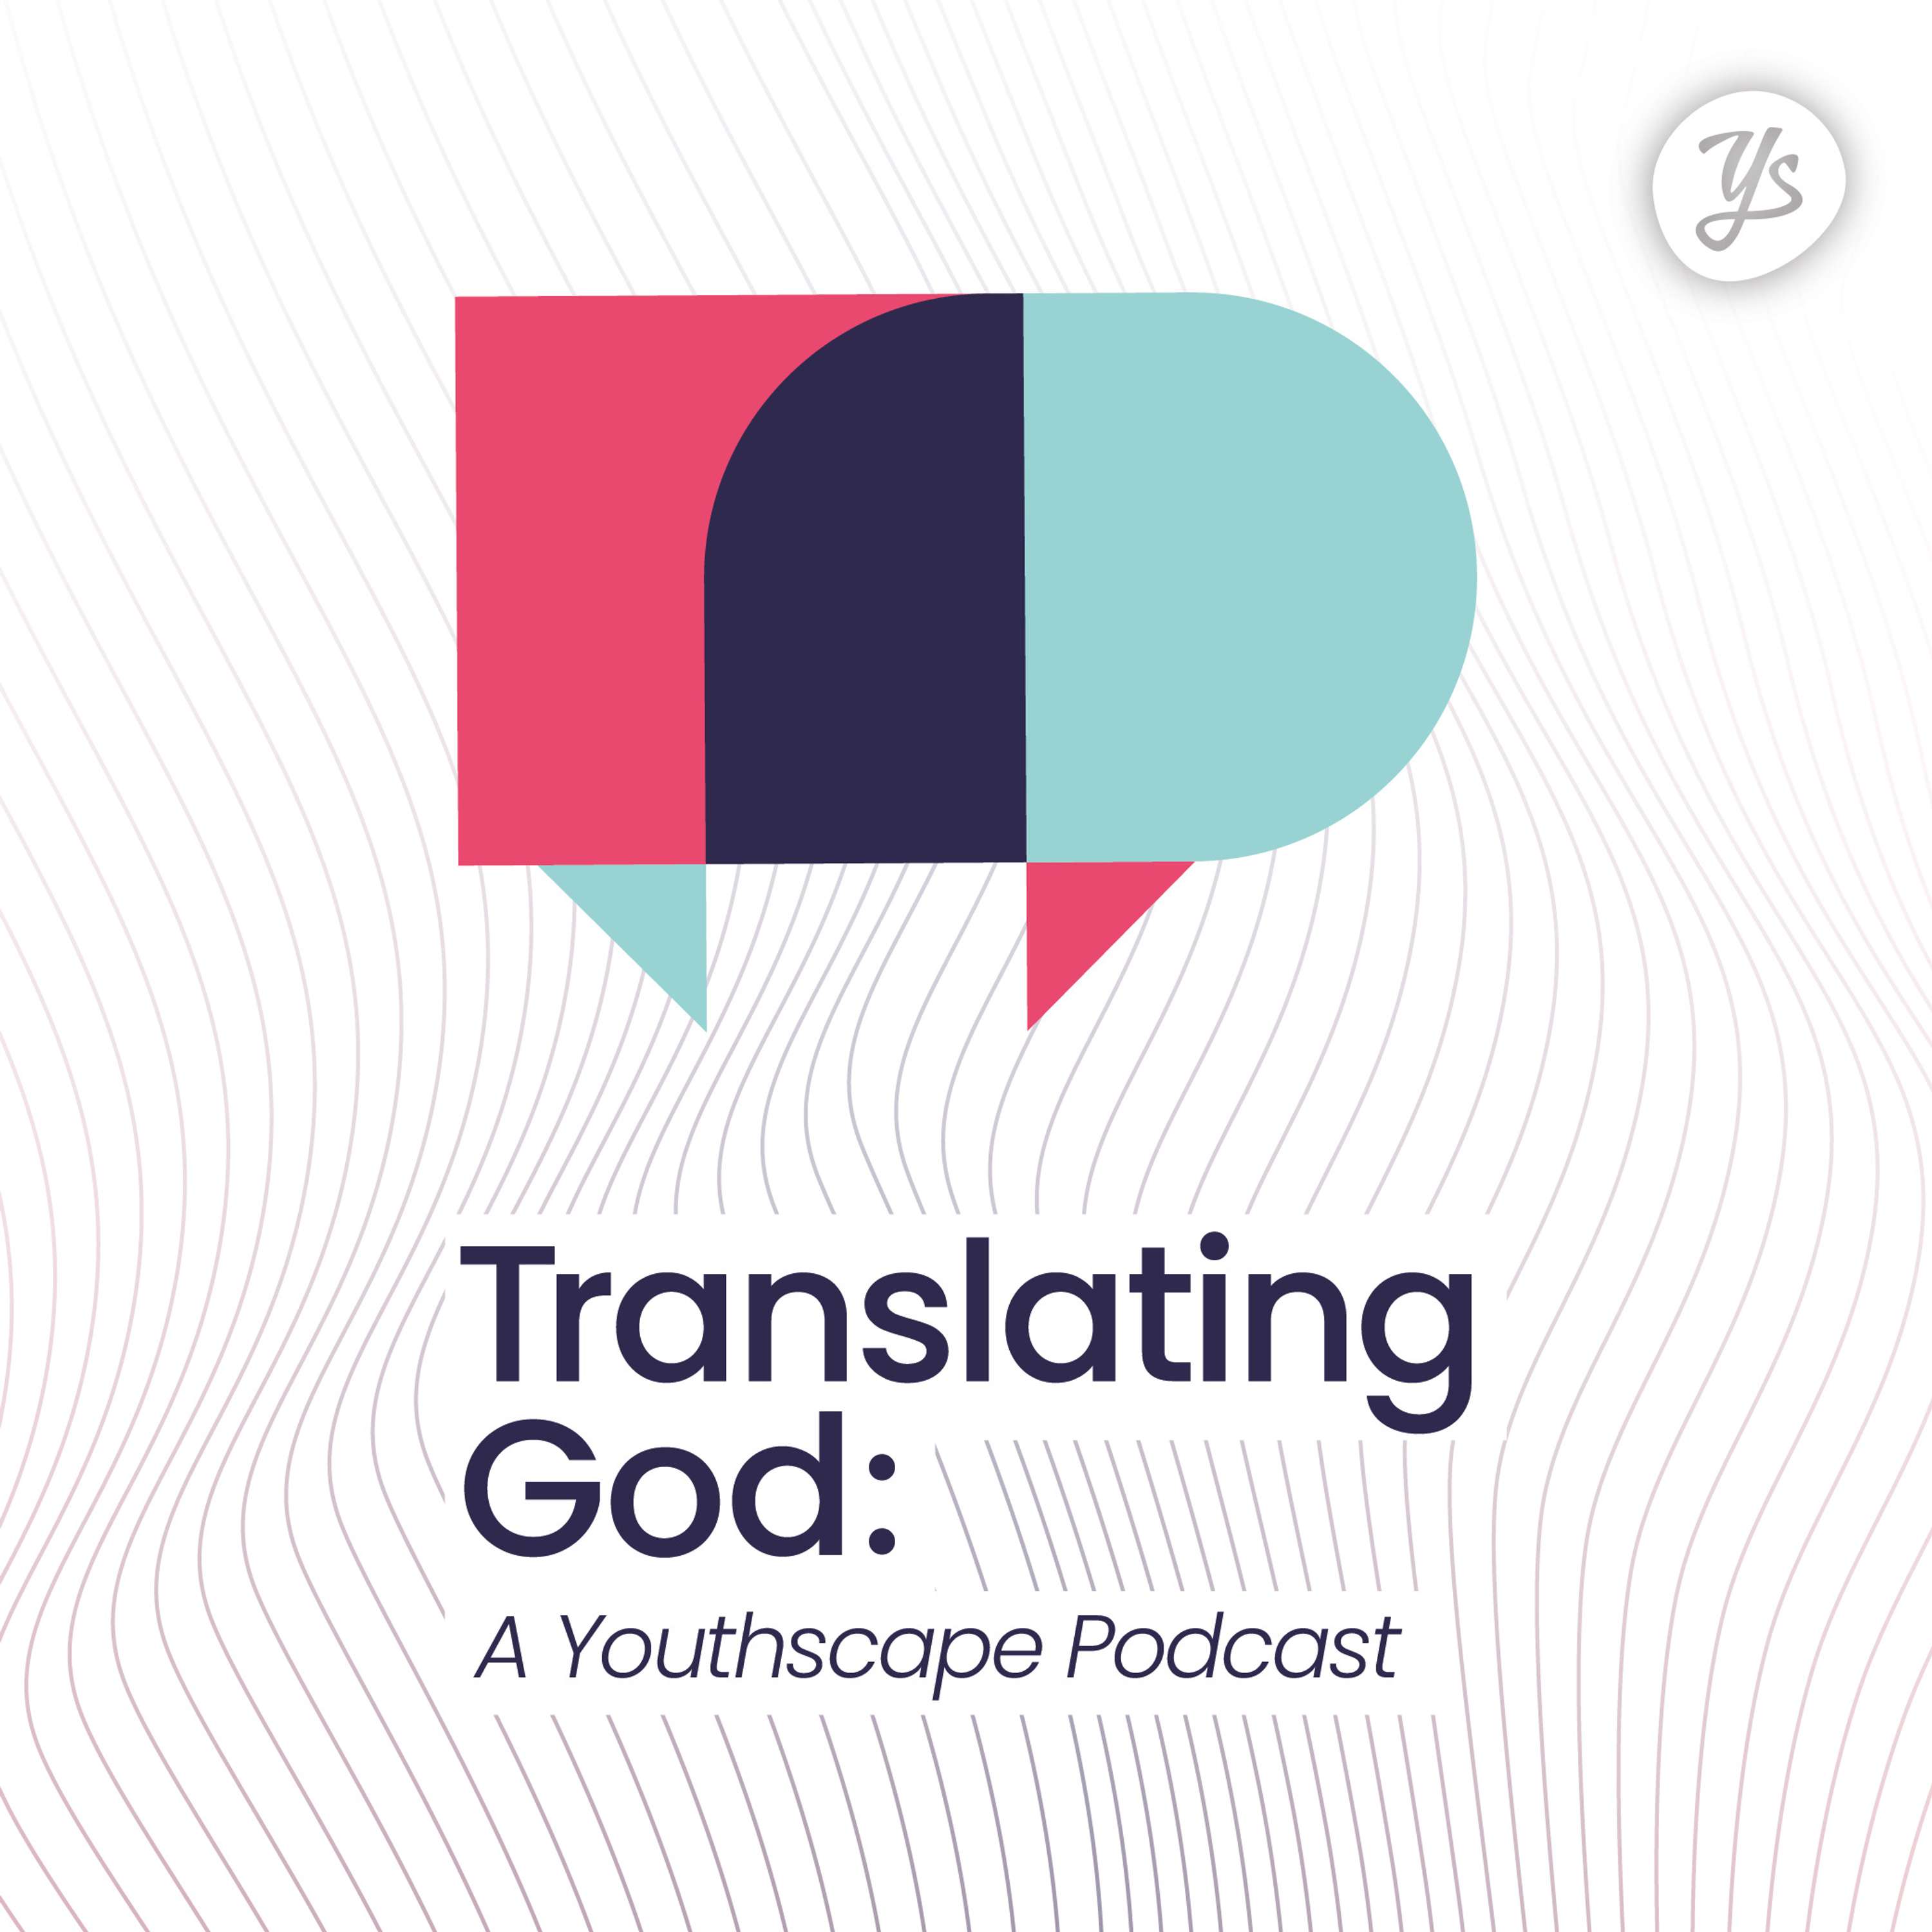 Identifying Christians, mental distress and online increase | Episode 4 | Translating God: A Youthscape Podcast